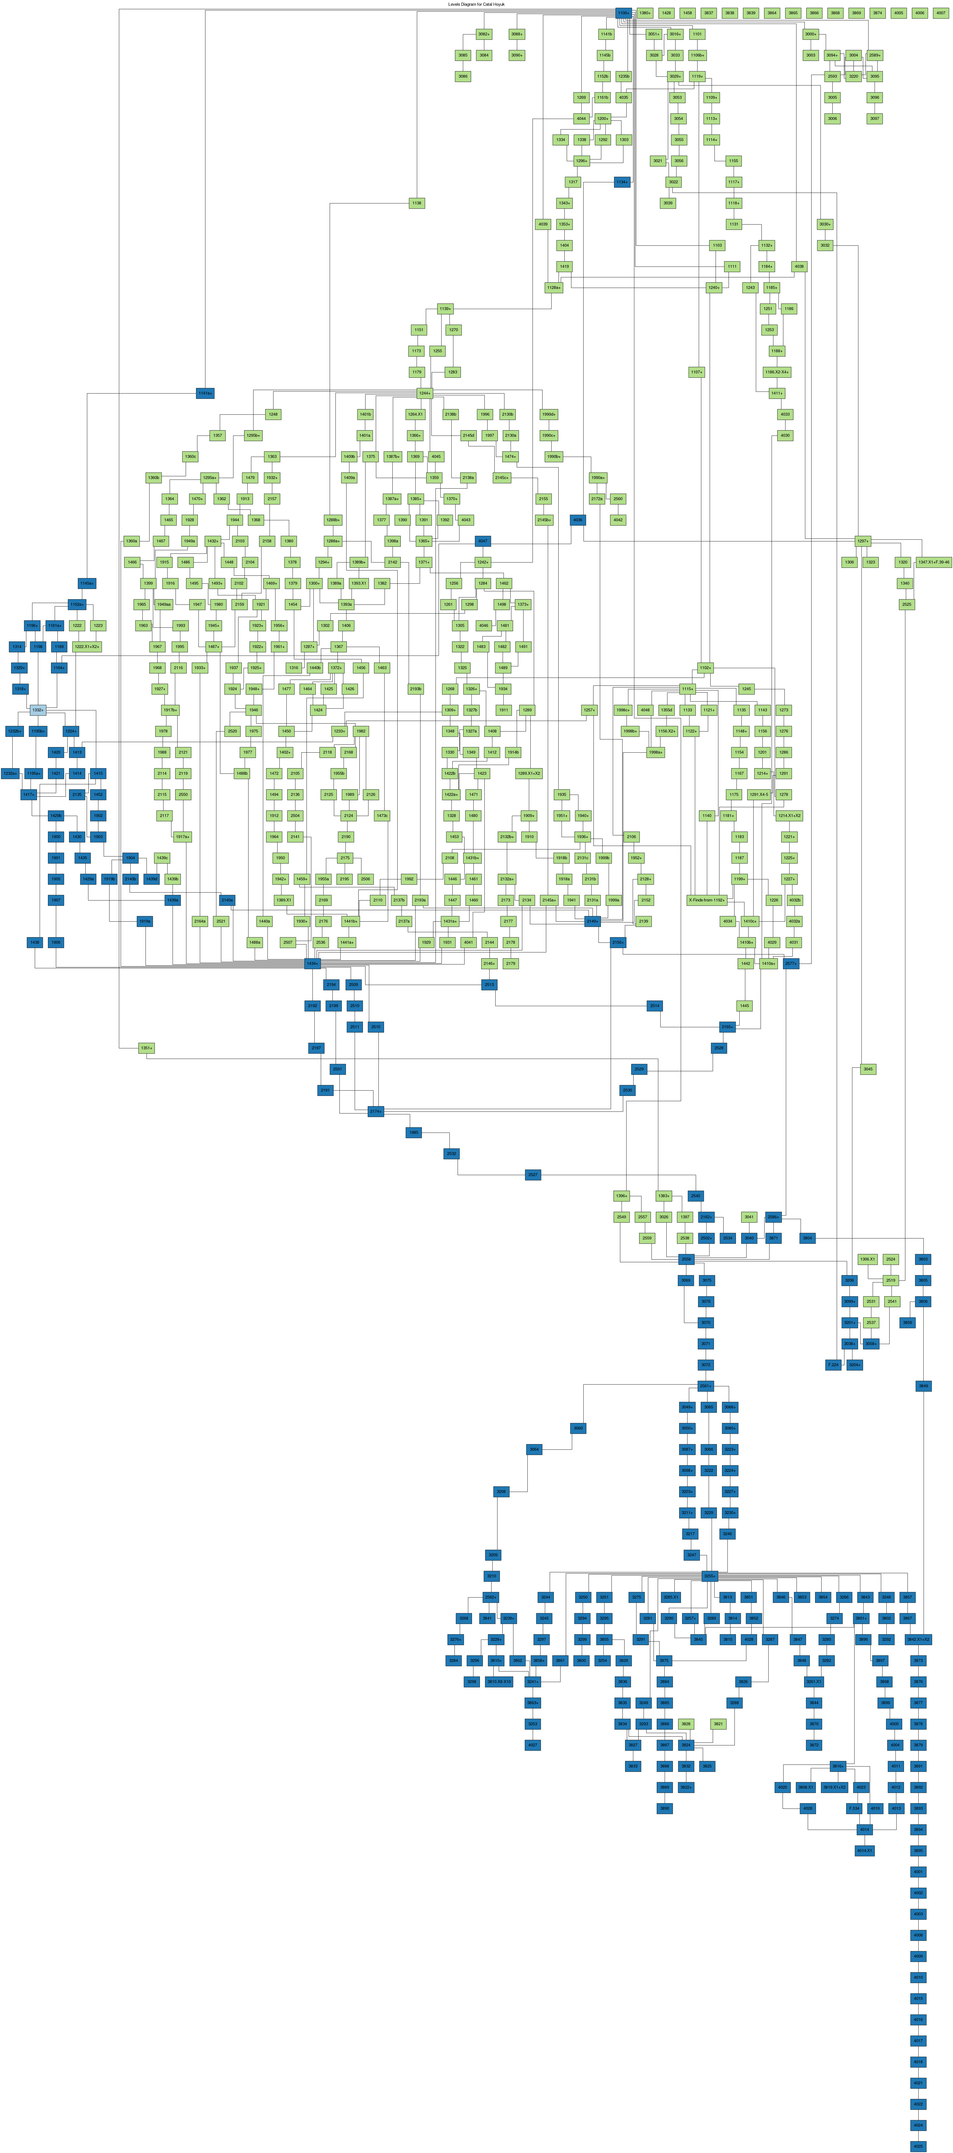 Figure 3: Stratigraphic DAG of the North Area sequence with nodes classified according to reachability to and from Context 1332+. Context 1332+ is light blue.  Nodes reachable from Context 1332+ are dark blue. Nodes not reachable from Context 1332+ are green.